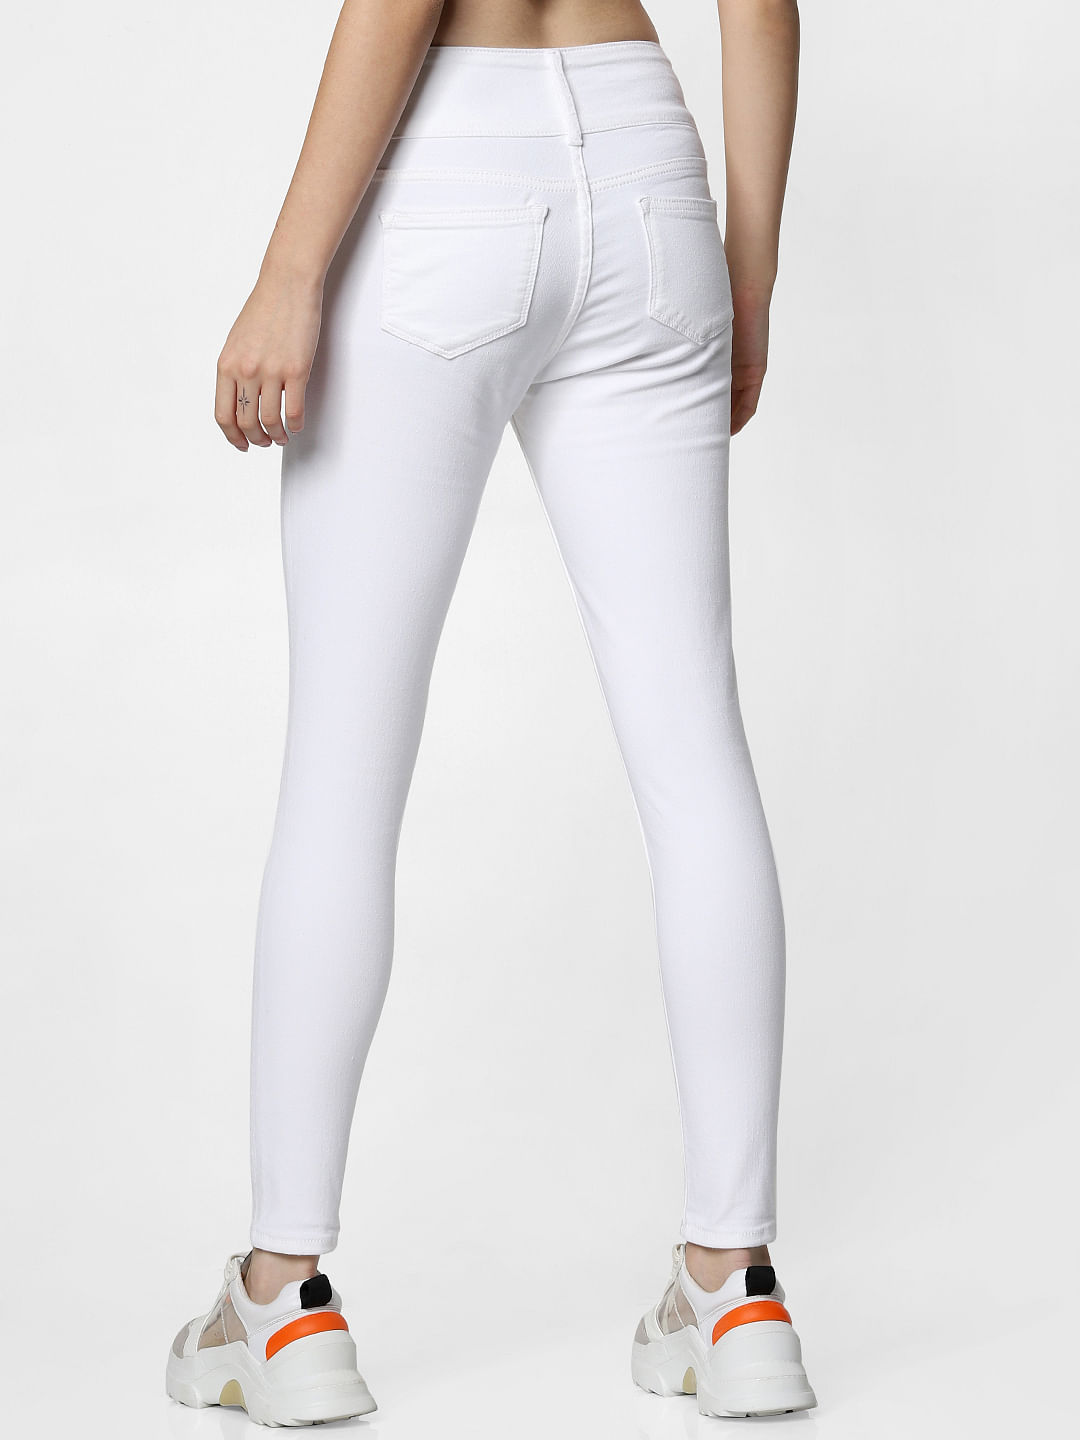 High Quality Ladies Skinny Jeans Women White High Waist Render Jeans Sexy  Pencil Pants Denim Ripped Jeans  China High Quality Ladies Skinny Jeans  and White Denim Jeans price  MadeinChinacom